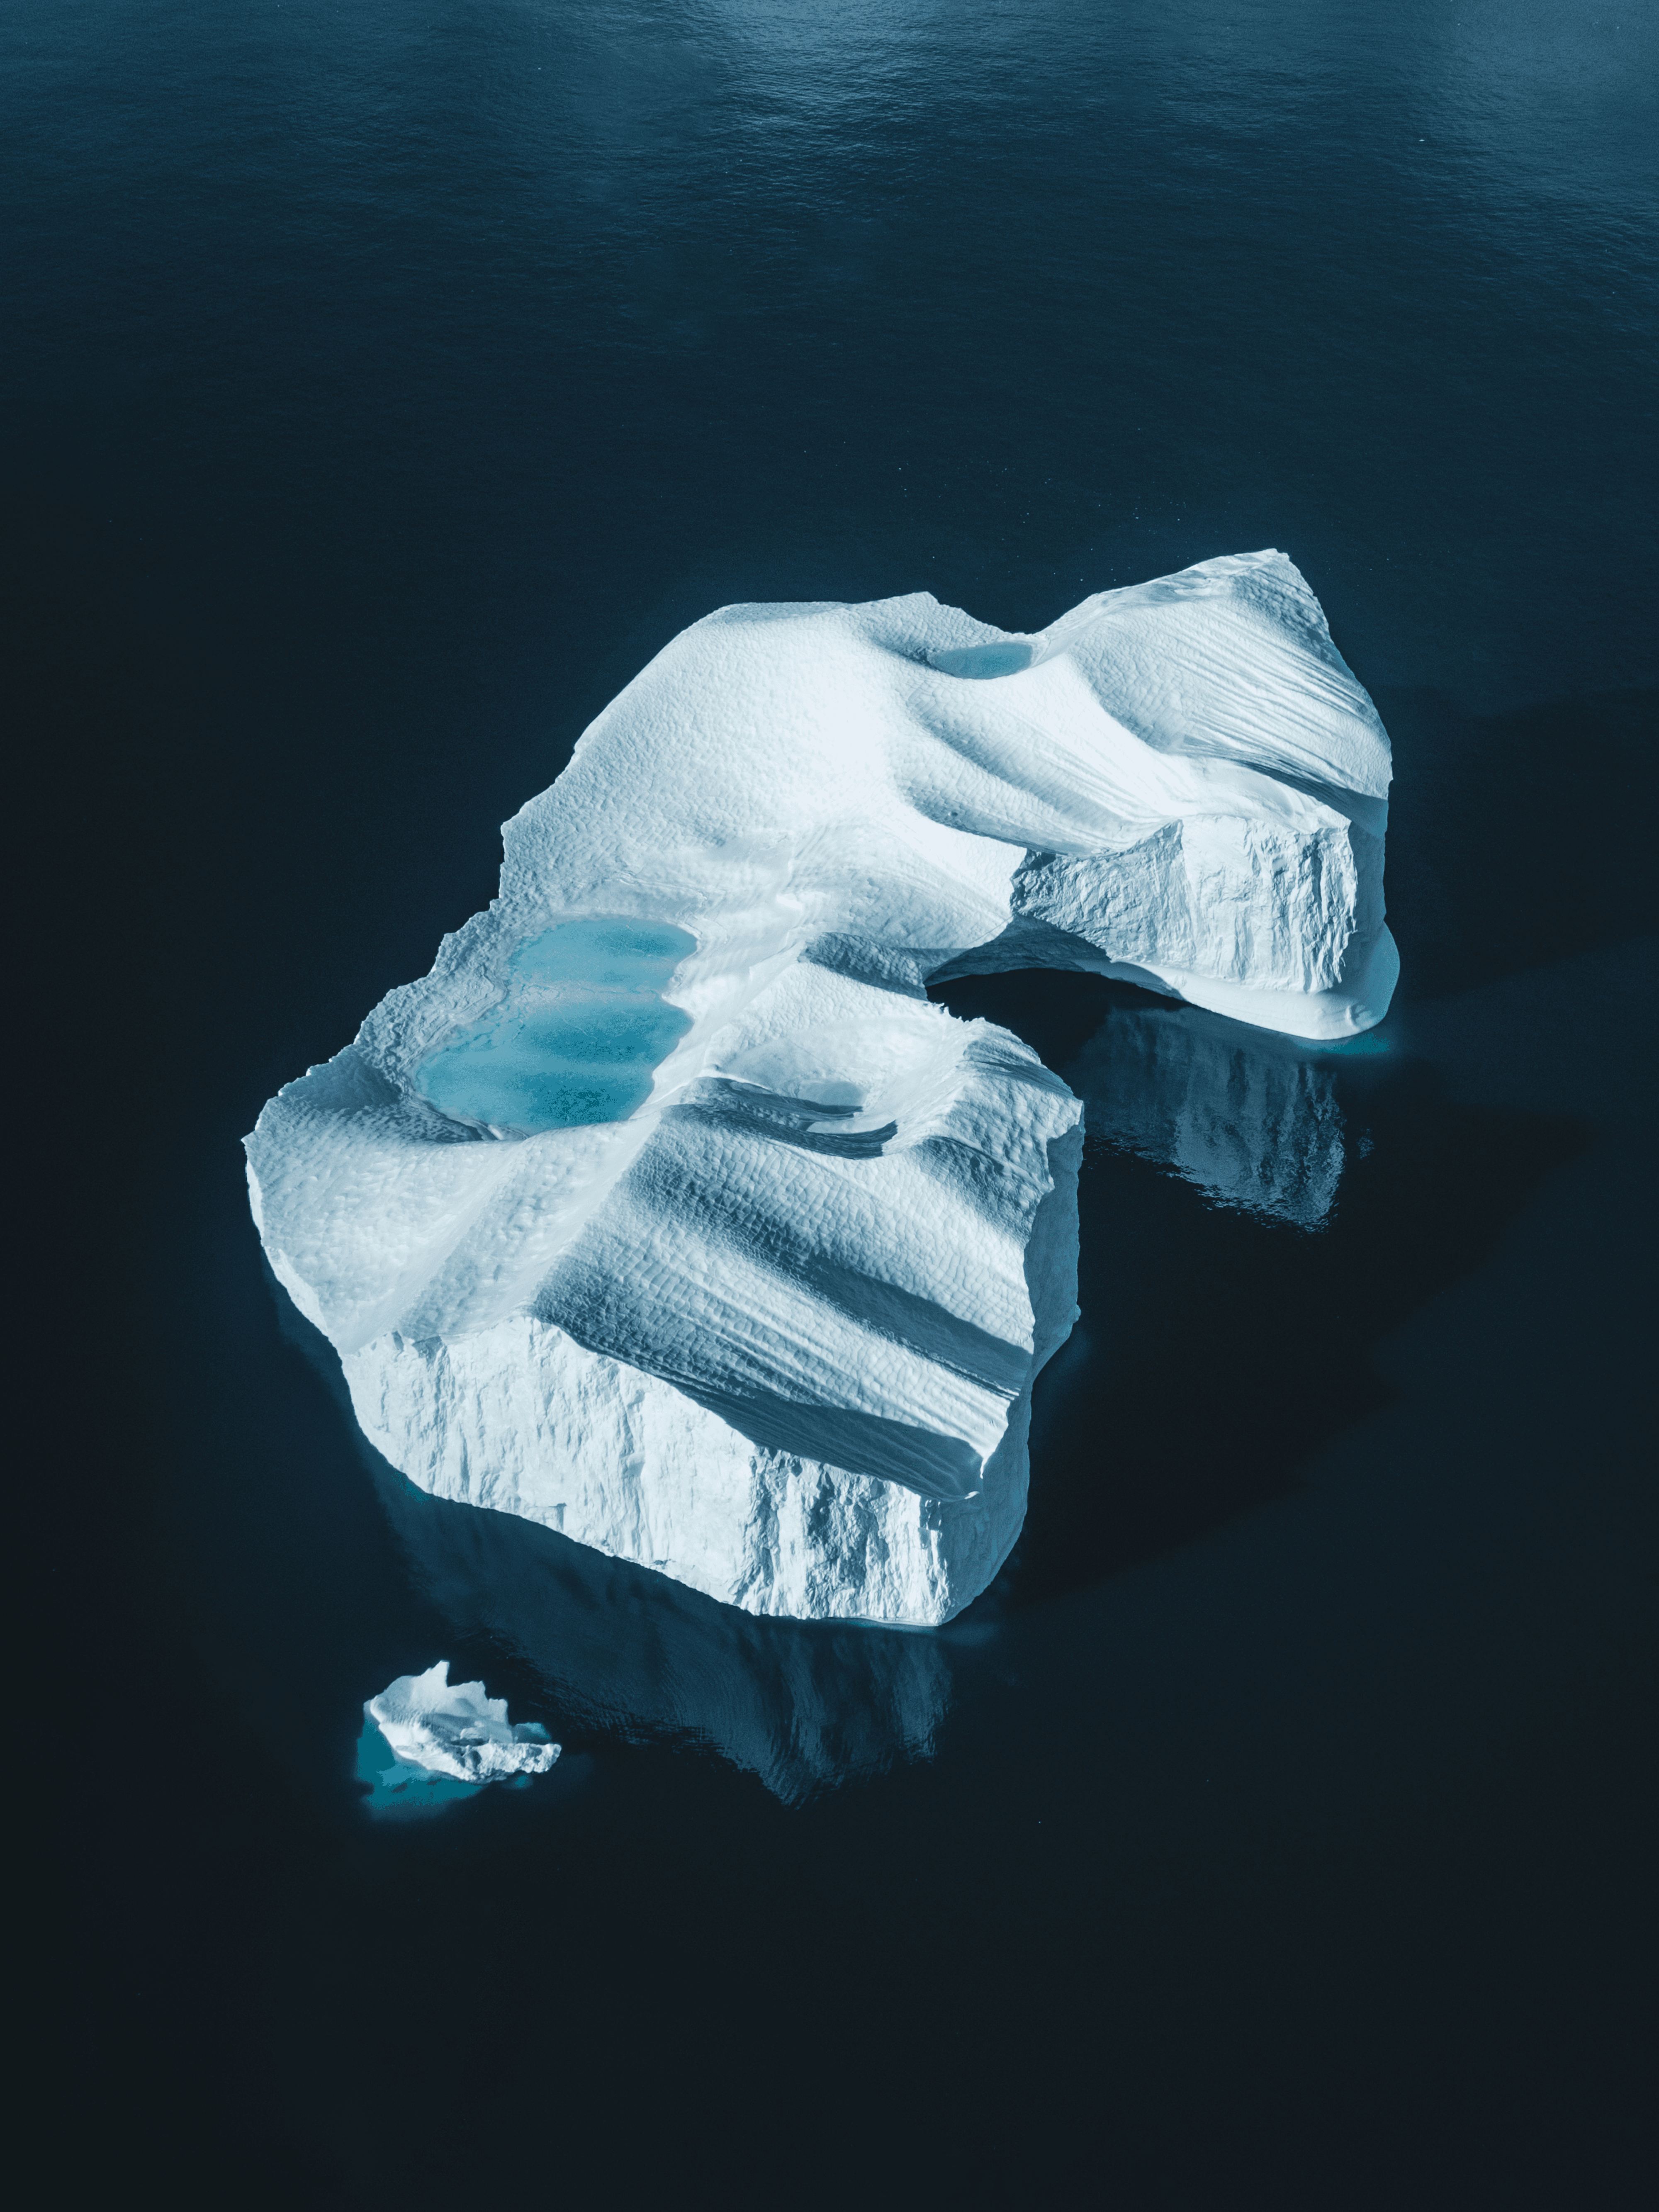 A Decade From Above #1 - Frozen pools of Uummannaq